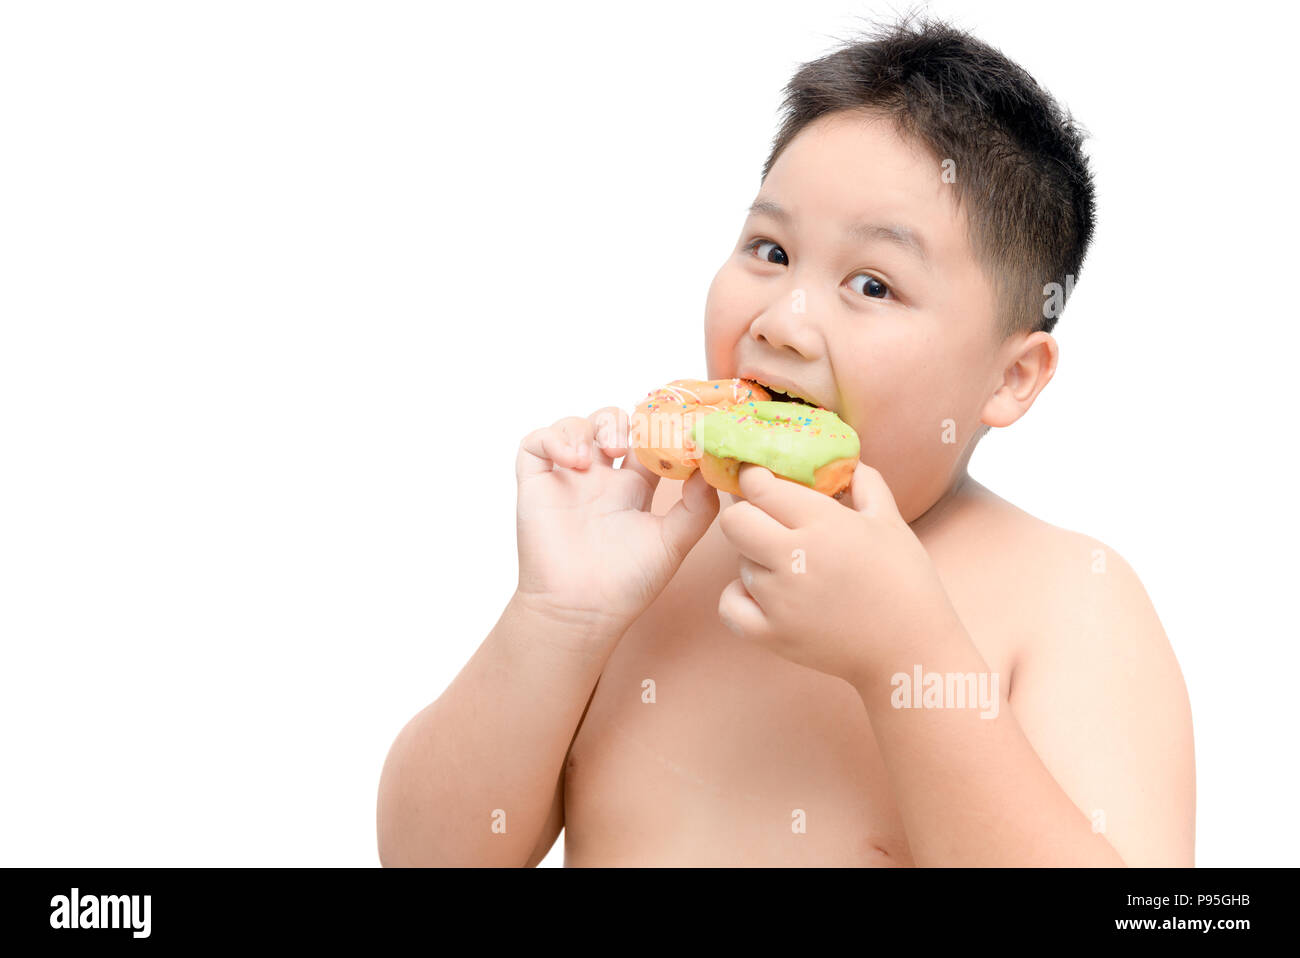 Obese fat boy is eating donut isolated on white background, junk food and dieting concept Stock Photo